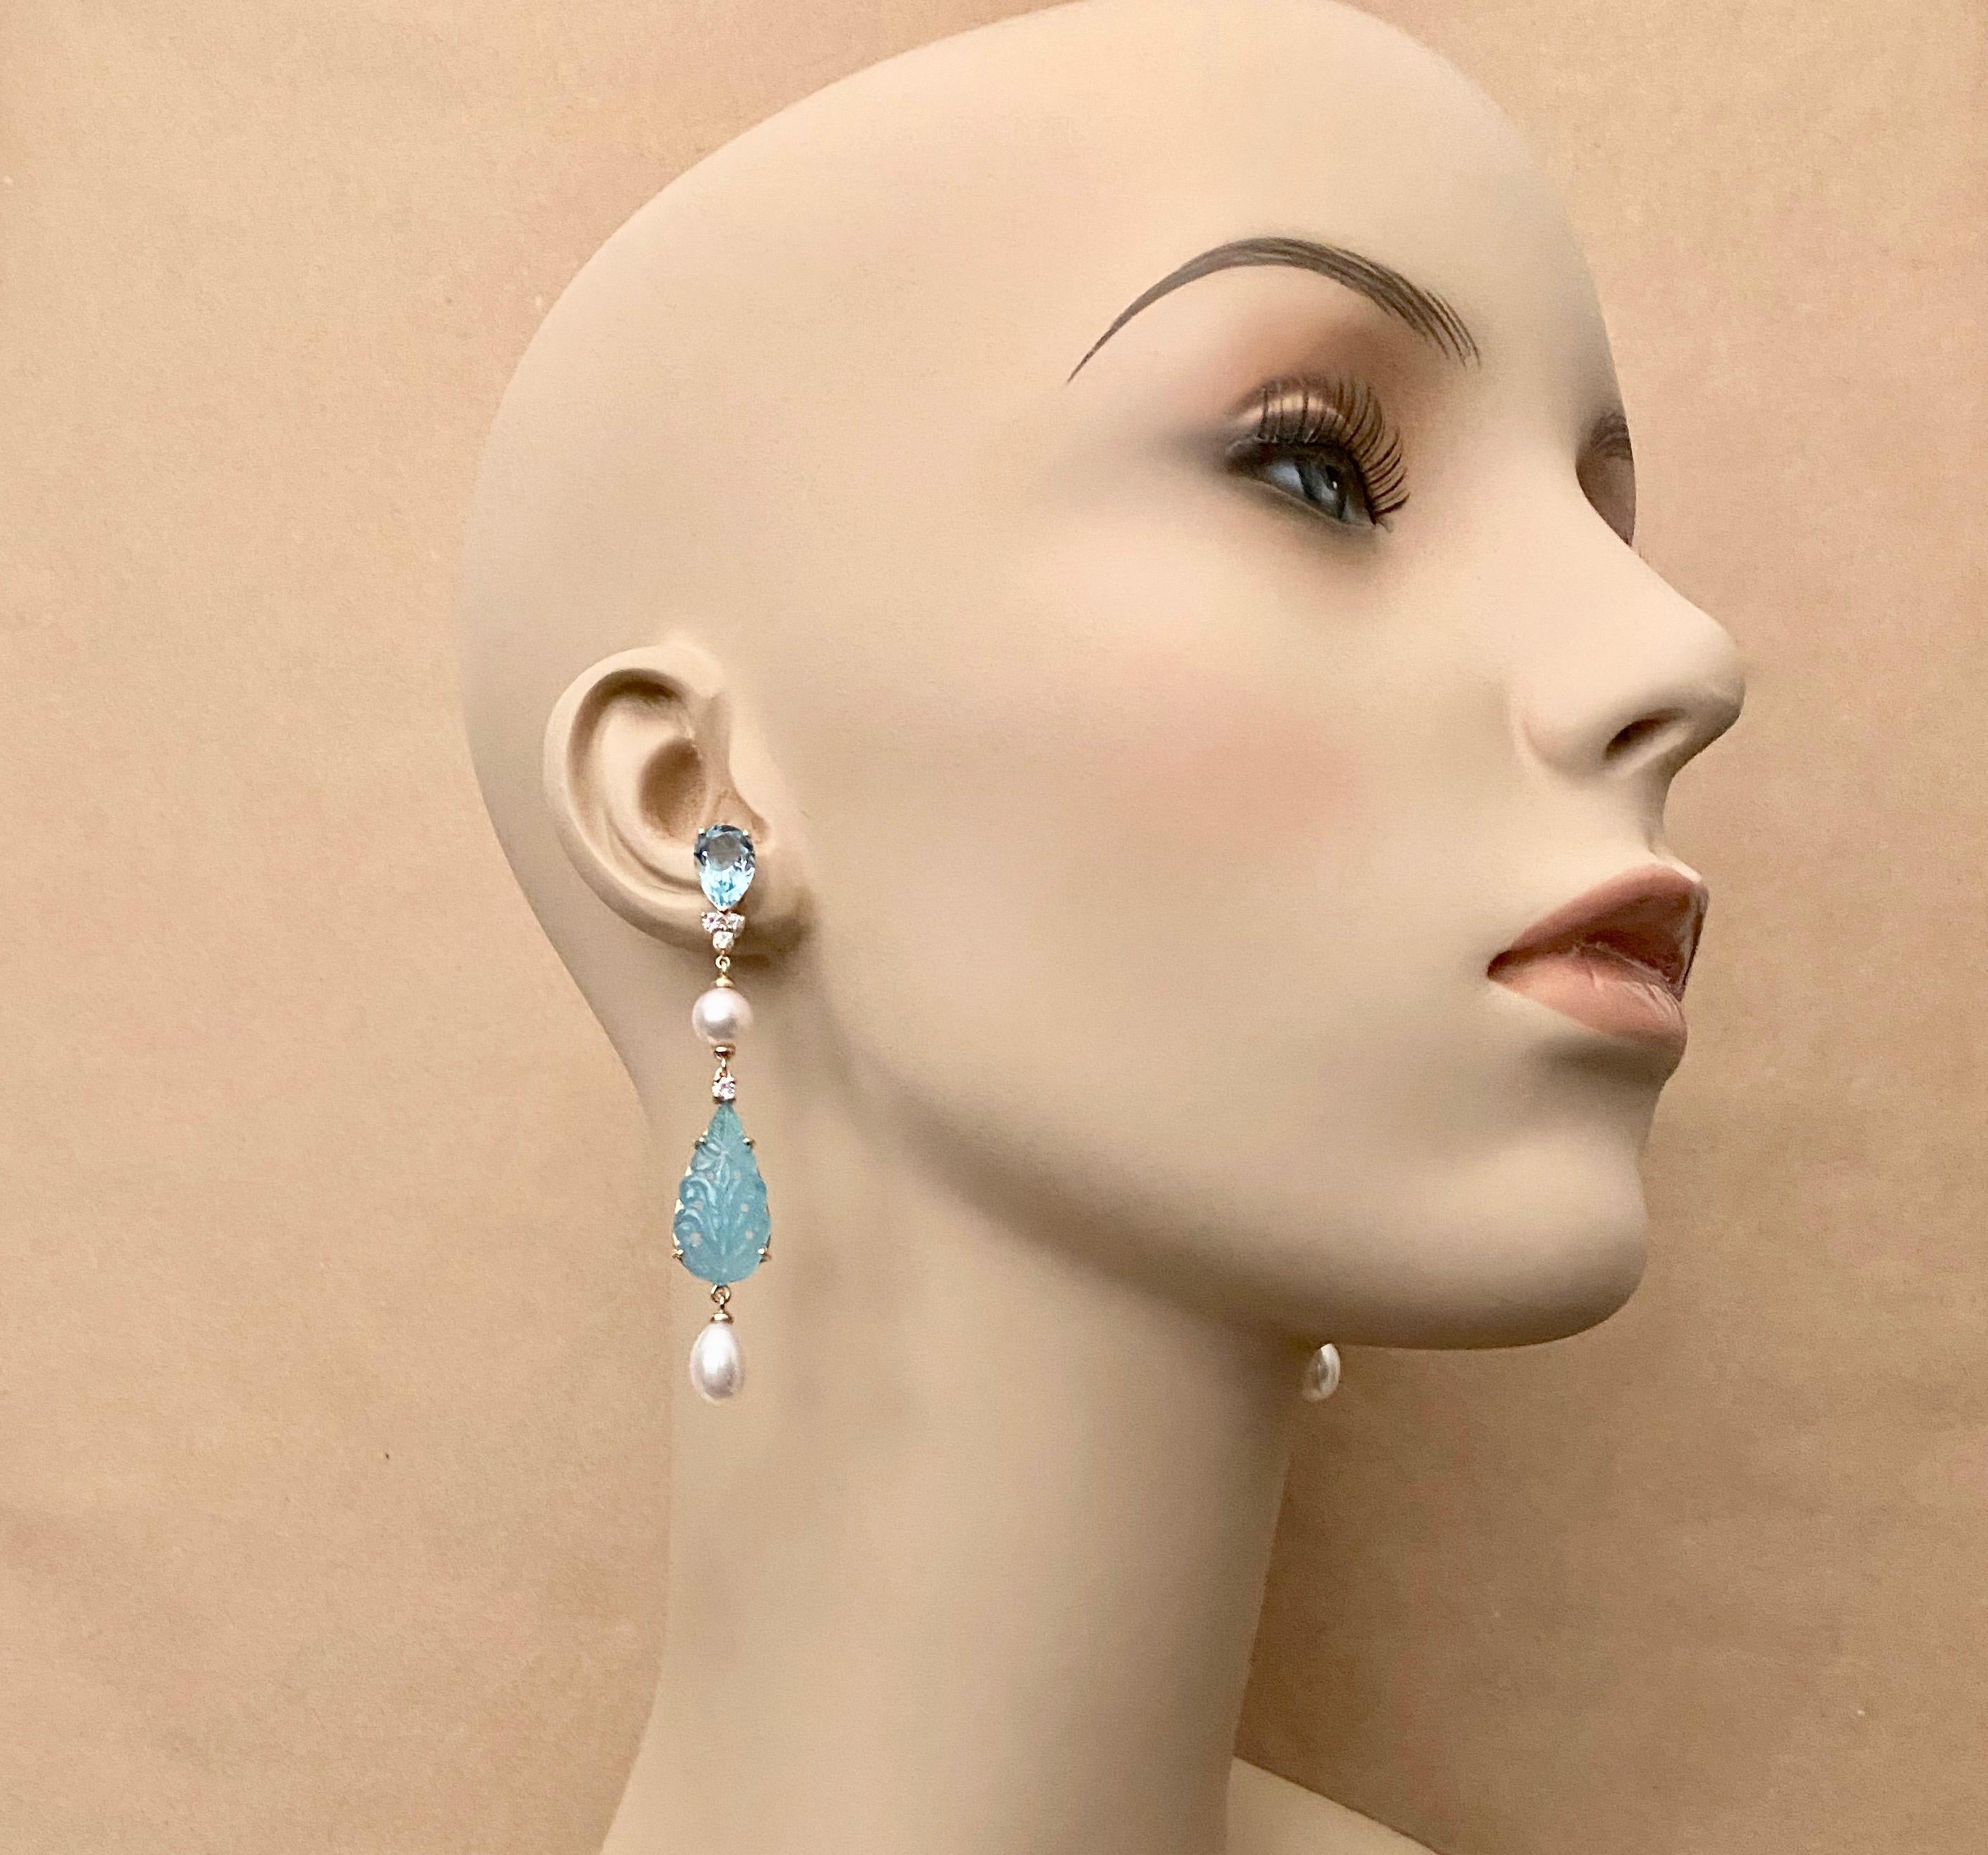 A mixed collection of gems are combined to create these sophisticated dangle earrings.  Faceted pear shaped sky blue topaz (origin: Brazil) compliment carved baby blue chalcedony drops (origin: Brazil).  The floral carving is exquisite and in the